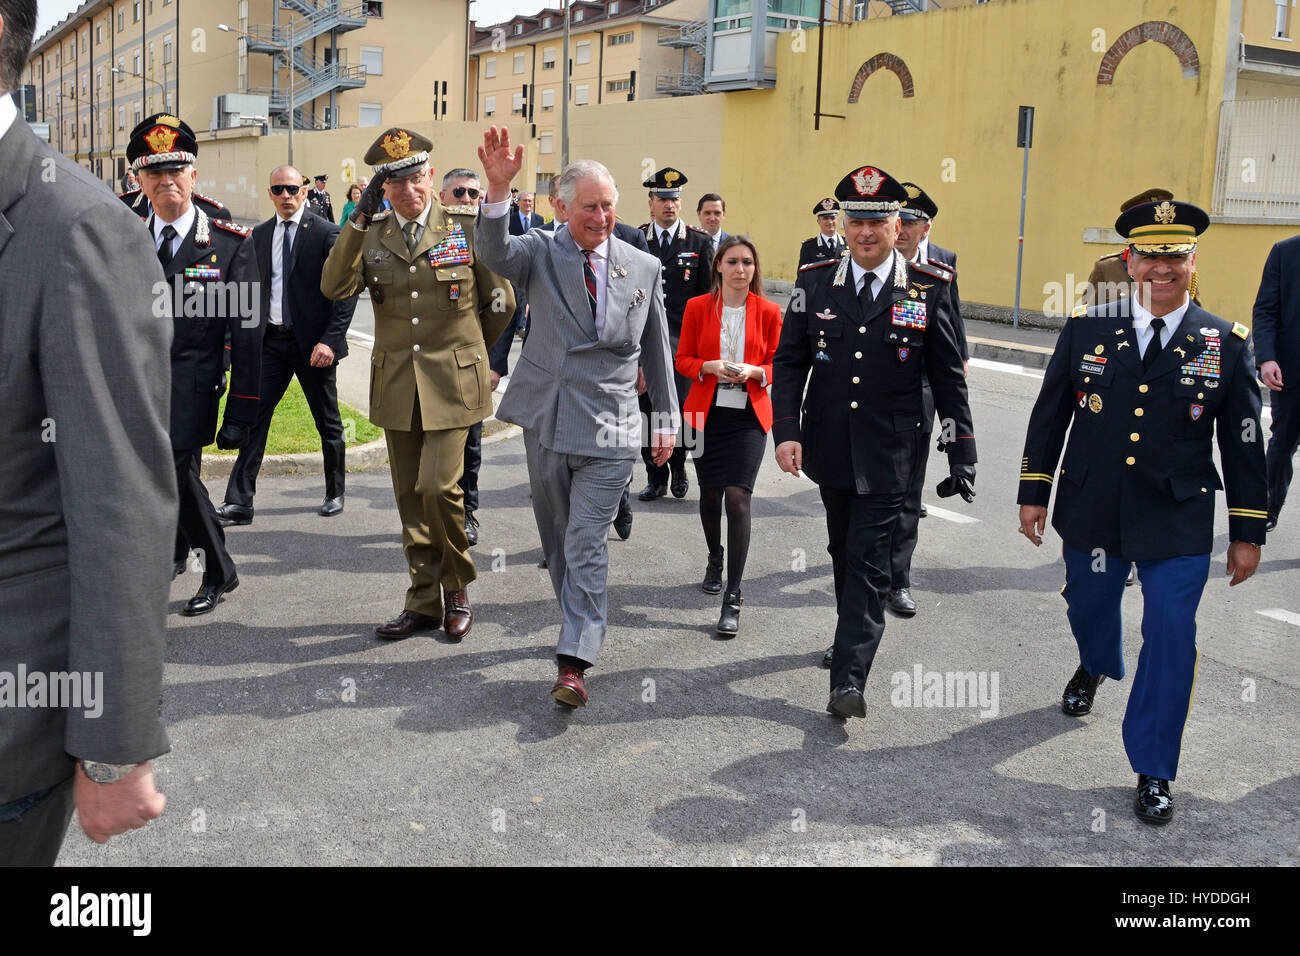 Charles, Prince of Wales waves during a visit to the Center of Excellence for Stability Police Units April 1, 2017 in Vicenza, Italy. The center is a train the trainer school developed by the Carabinieri for peace-keeping missions around the world. Stock Photo